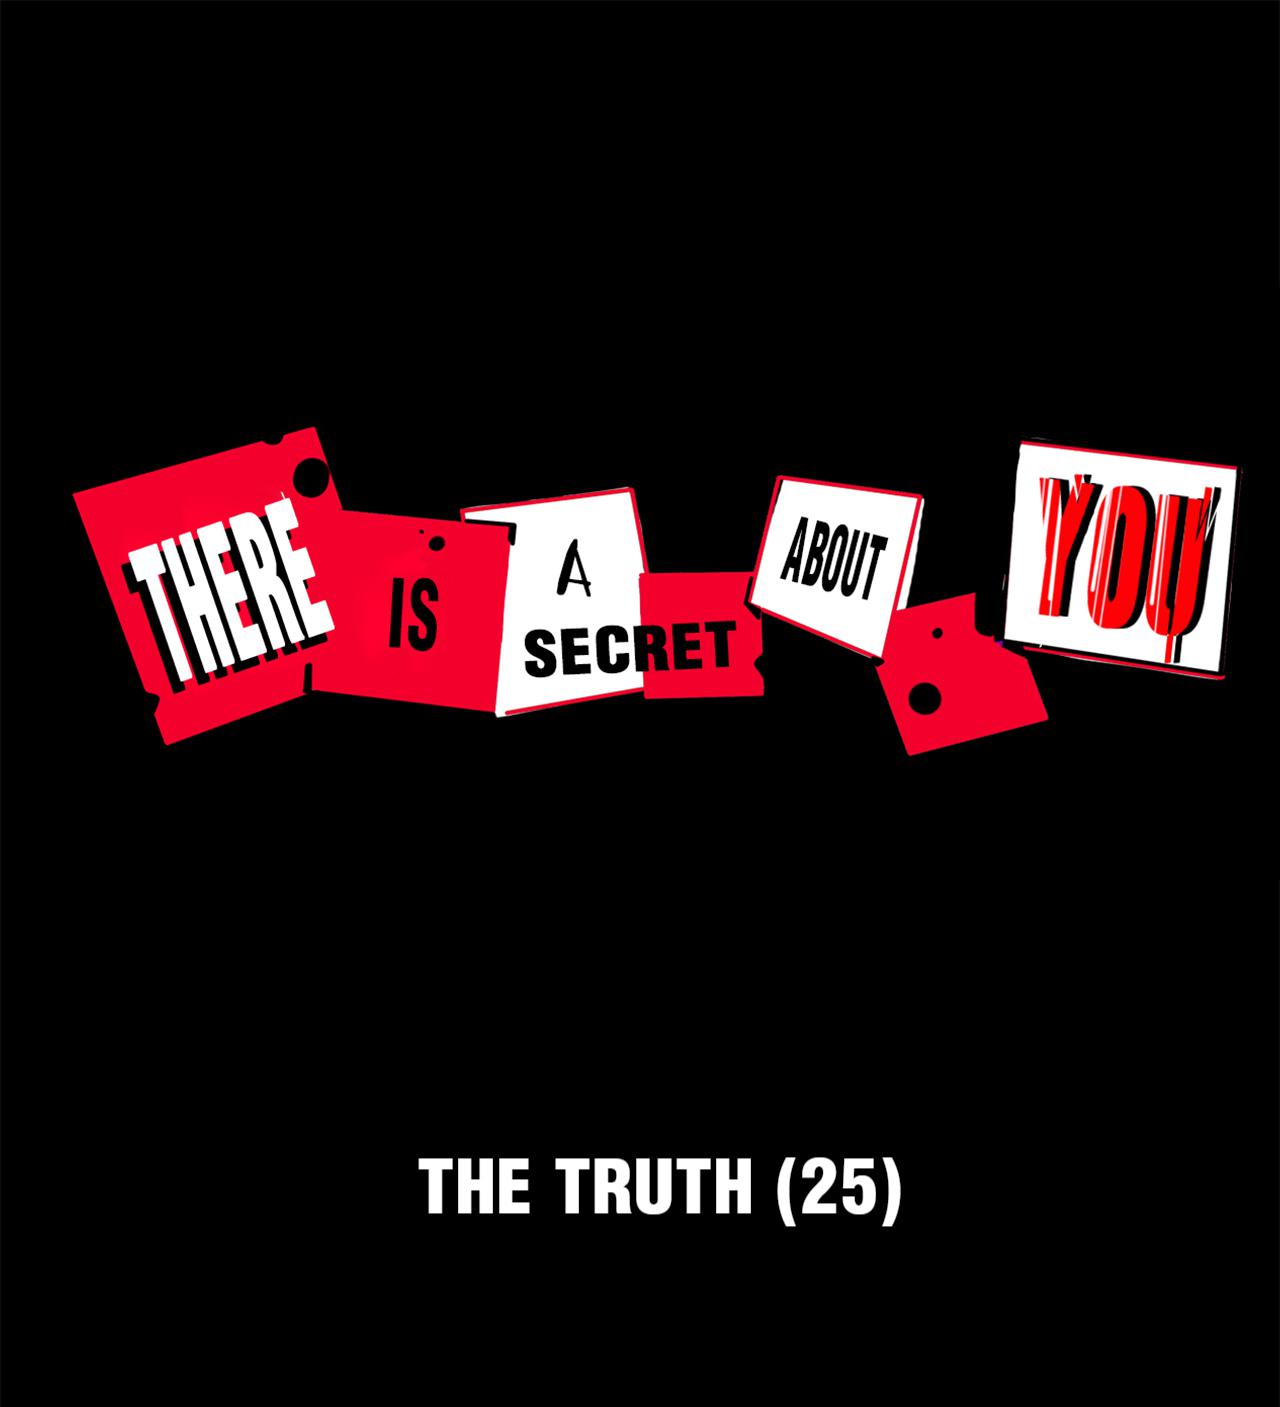 There Is a Secret About You 58